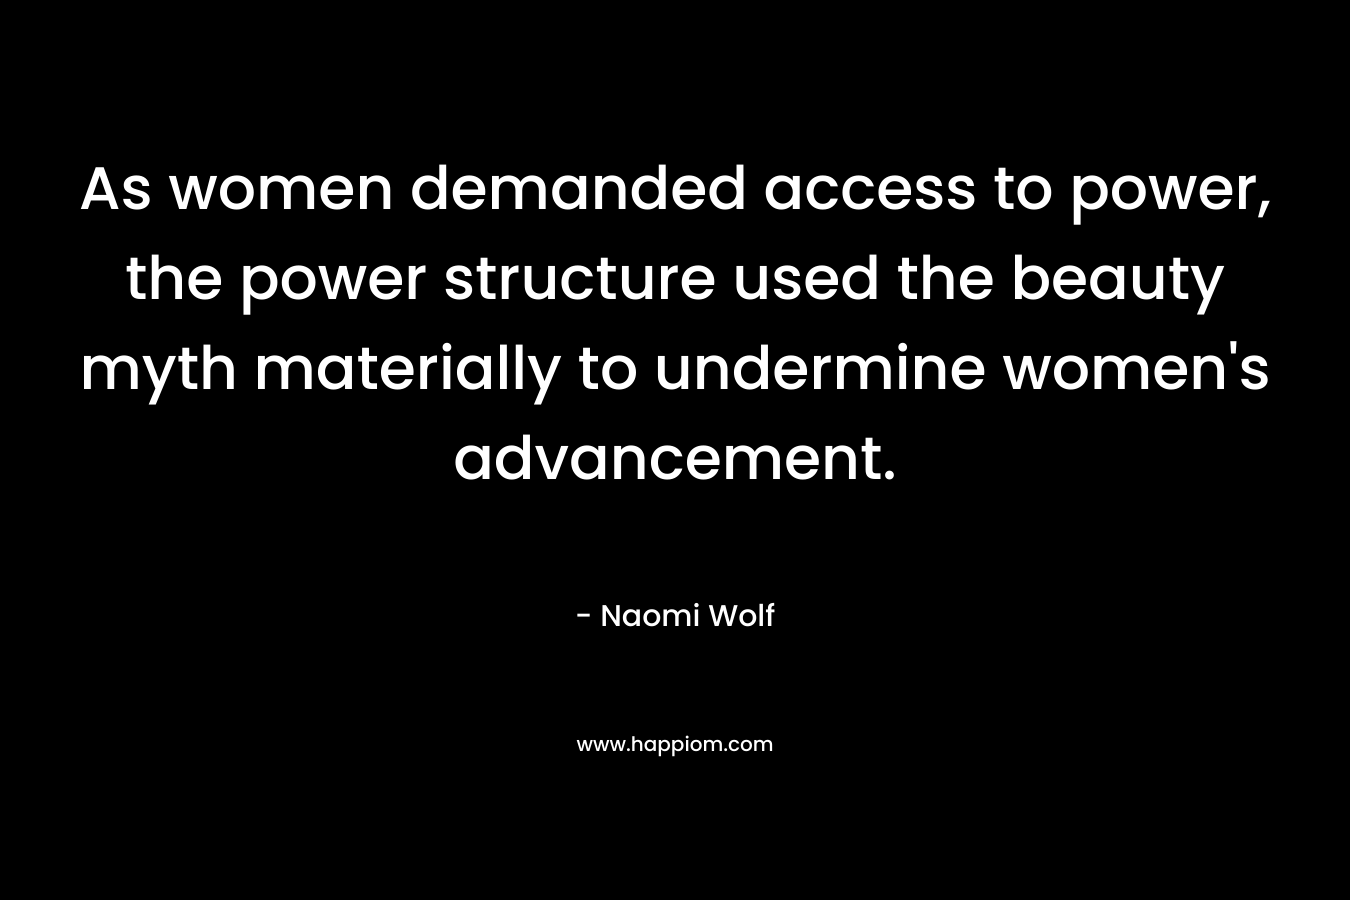 As women demanded access to power, the power structure used the beauty myth materially to undermine women's advancement.